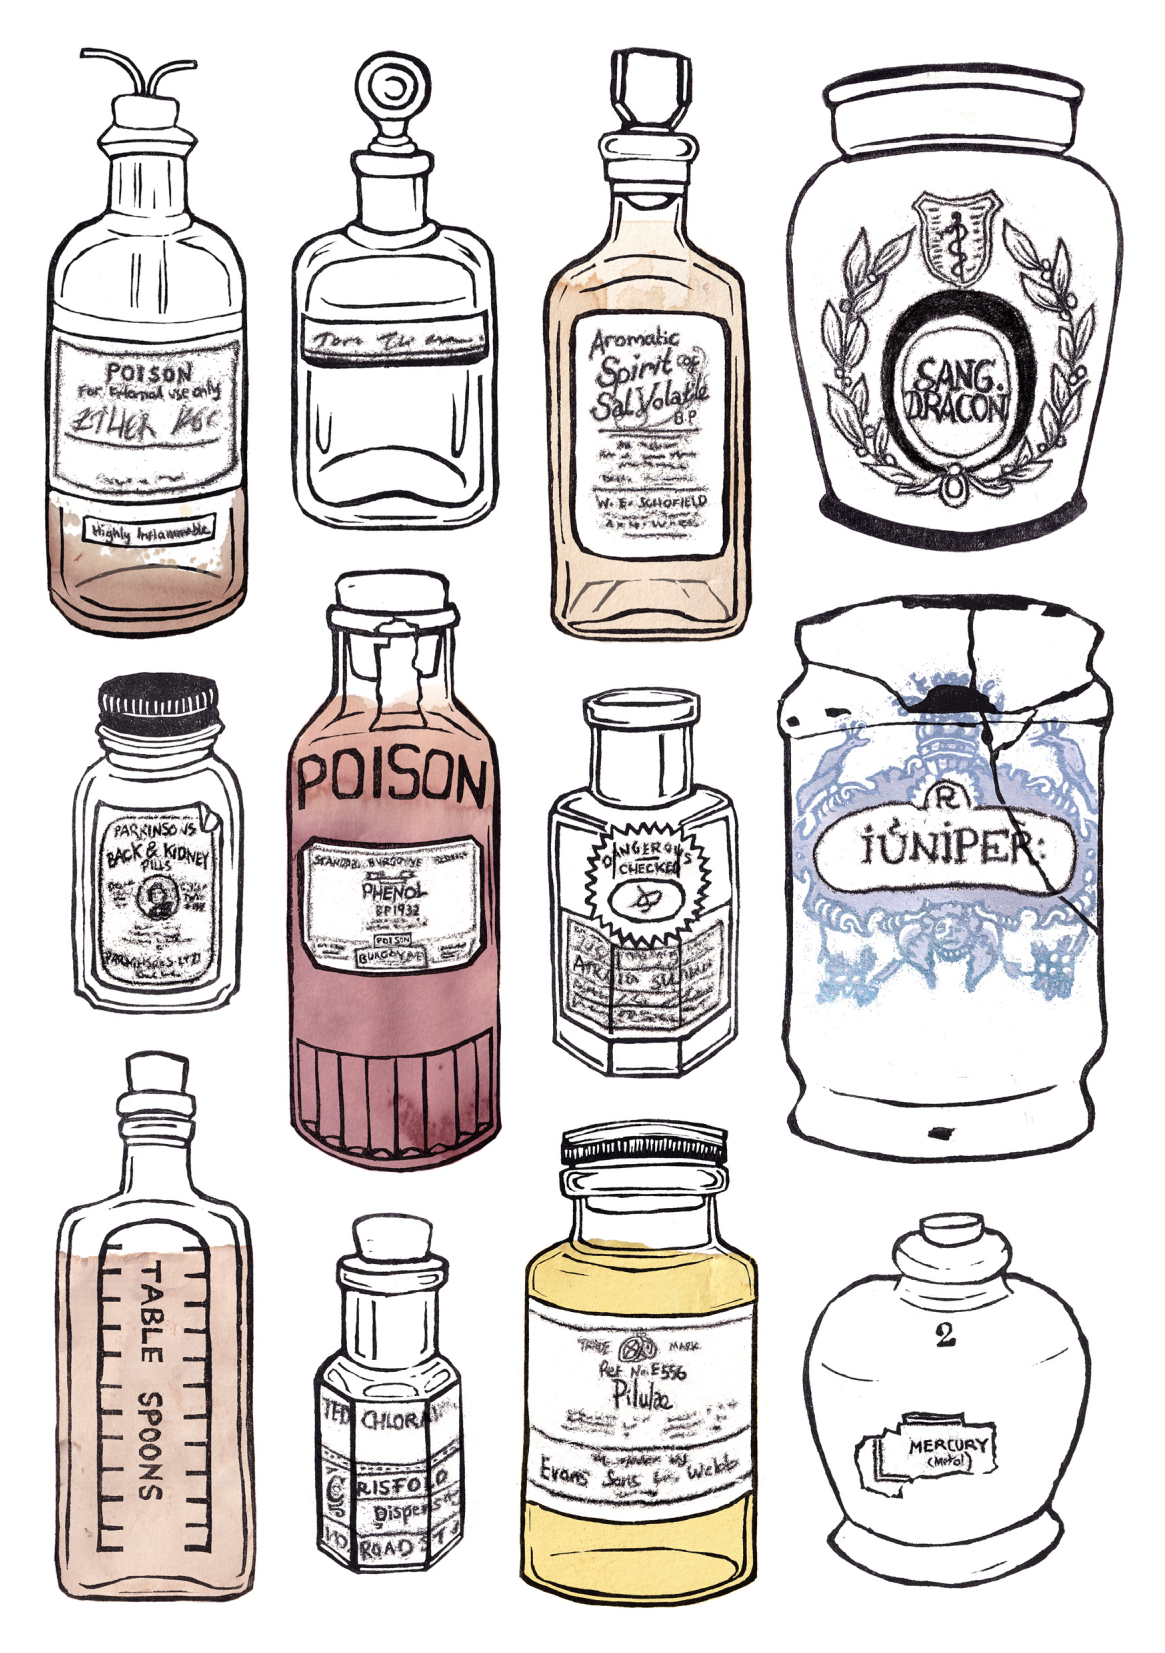 Painting of 12 apothecary bottles and jars, laid out in three rows